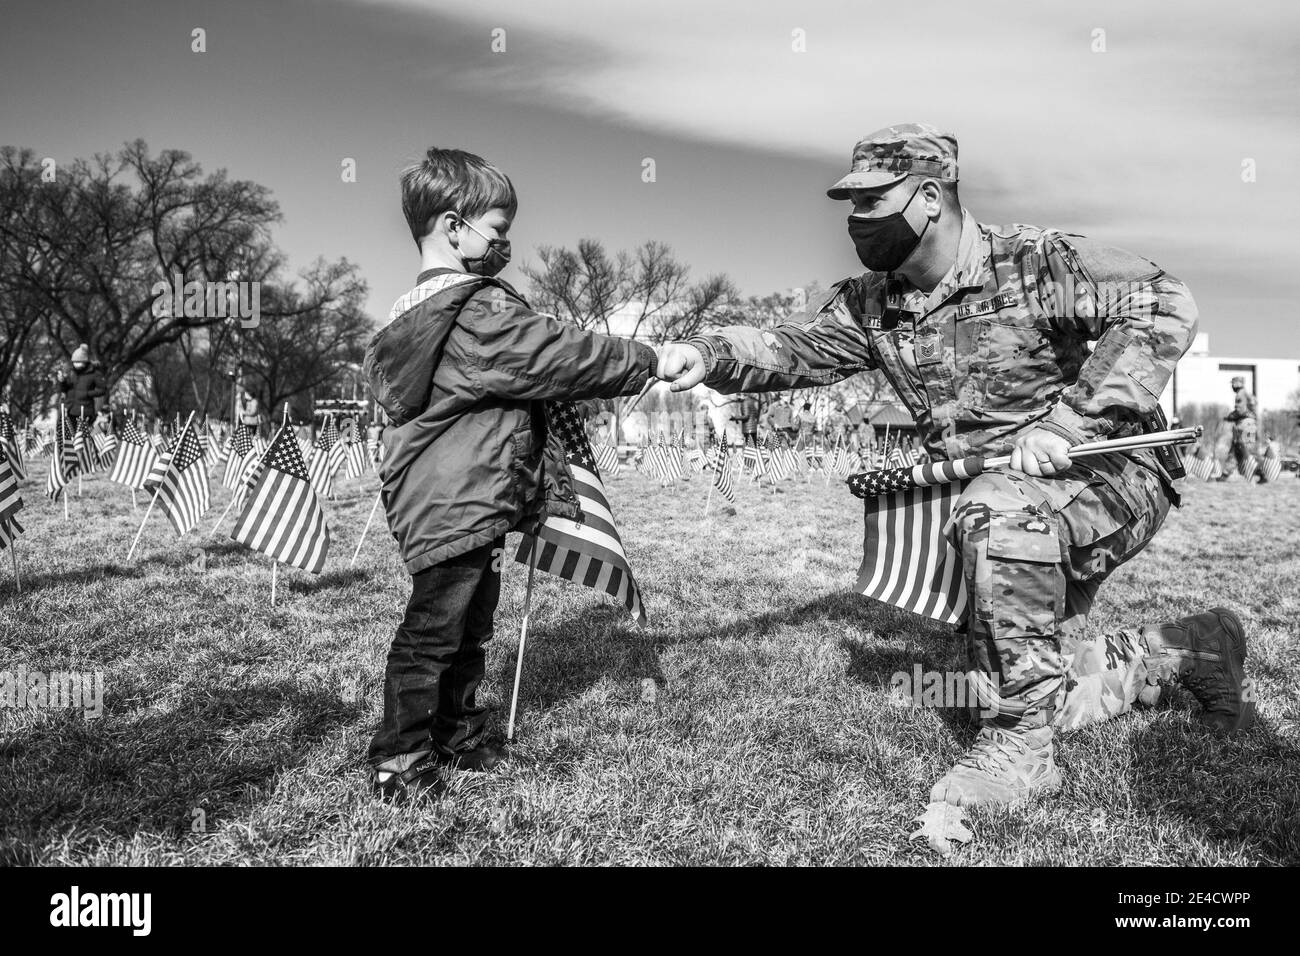 Washington, Dc, United States. 22nd Jan, 2021. WASHINGTON D.C., JANUARY 22- A boy fist bumps a member of the National Guard as they walk through'The Field of Flags' at the National Mall as it's disassembled flag by flag on January 22, 2021 in Washington, DC Nearly 200,000 flags were placed on the grass to represent Americans who died from Covid-19 and couldn't be in attendance for the ceremony. Photo: Chris Tuite/ImageSPACE Credit: Imagespace/Alamy Live News Stock Photo